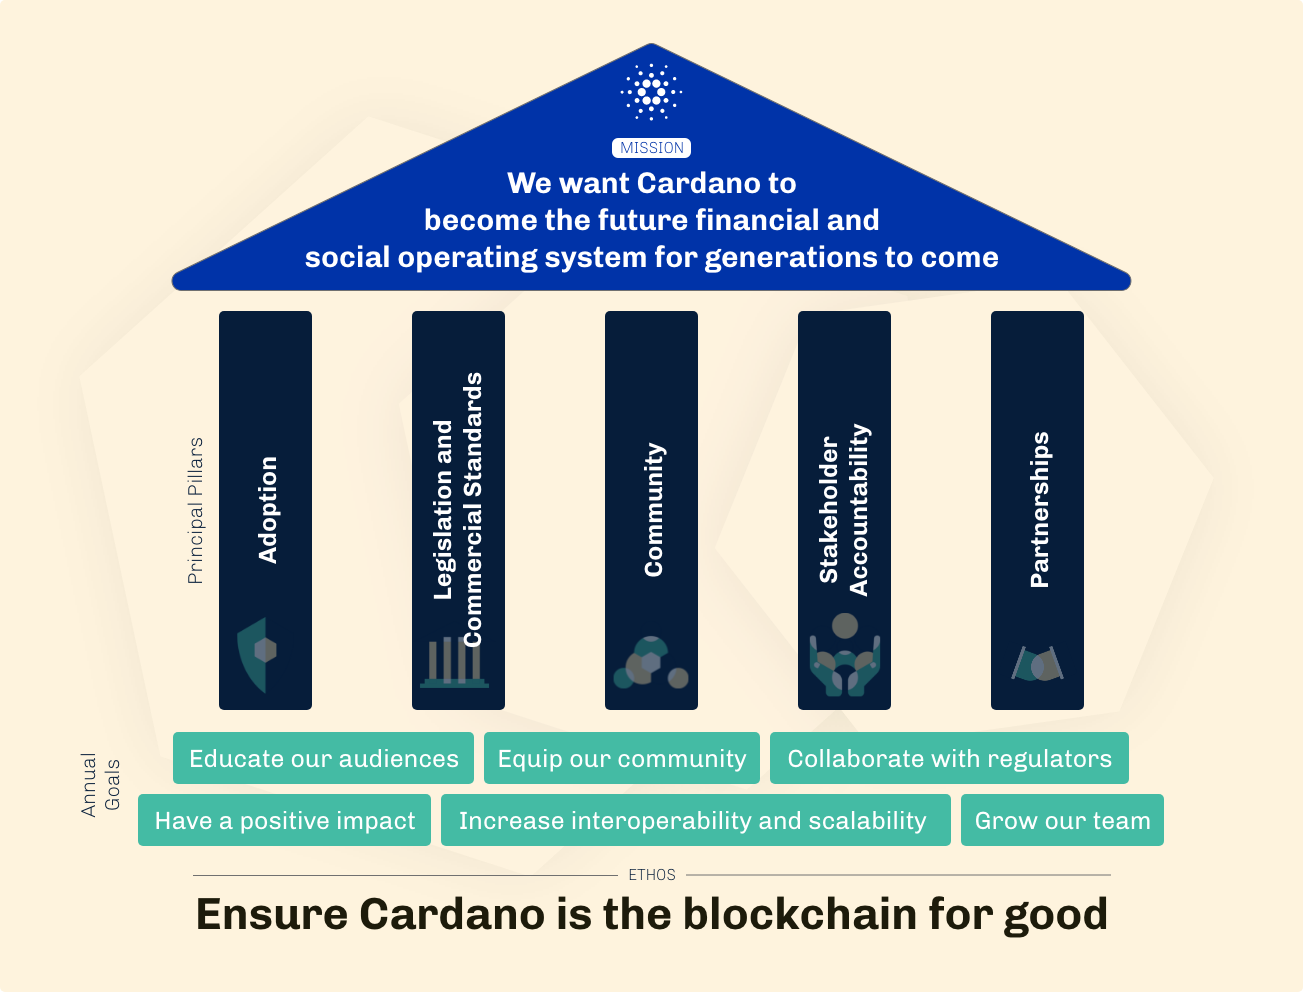 Cardano Mission: Ensure Cardano is the blockchain for good